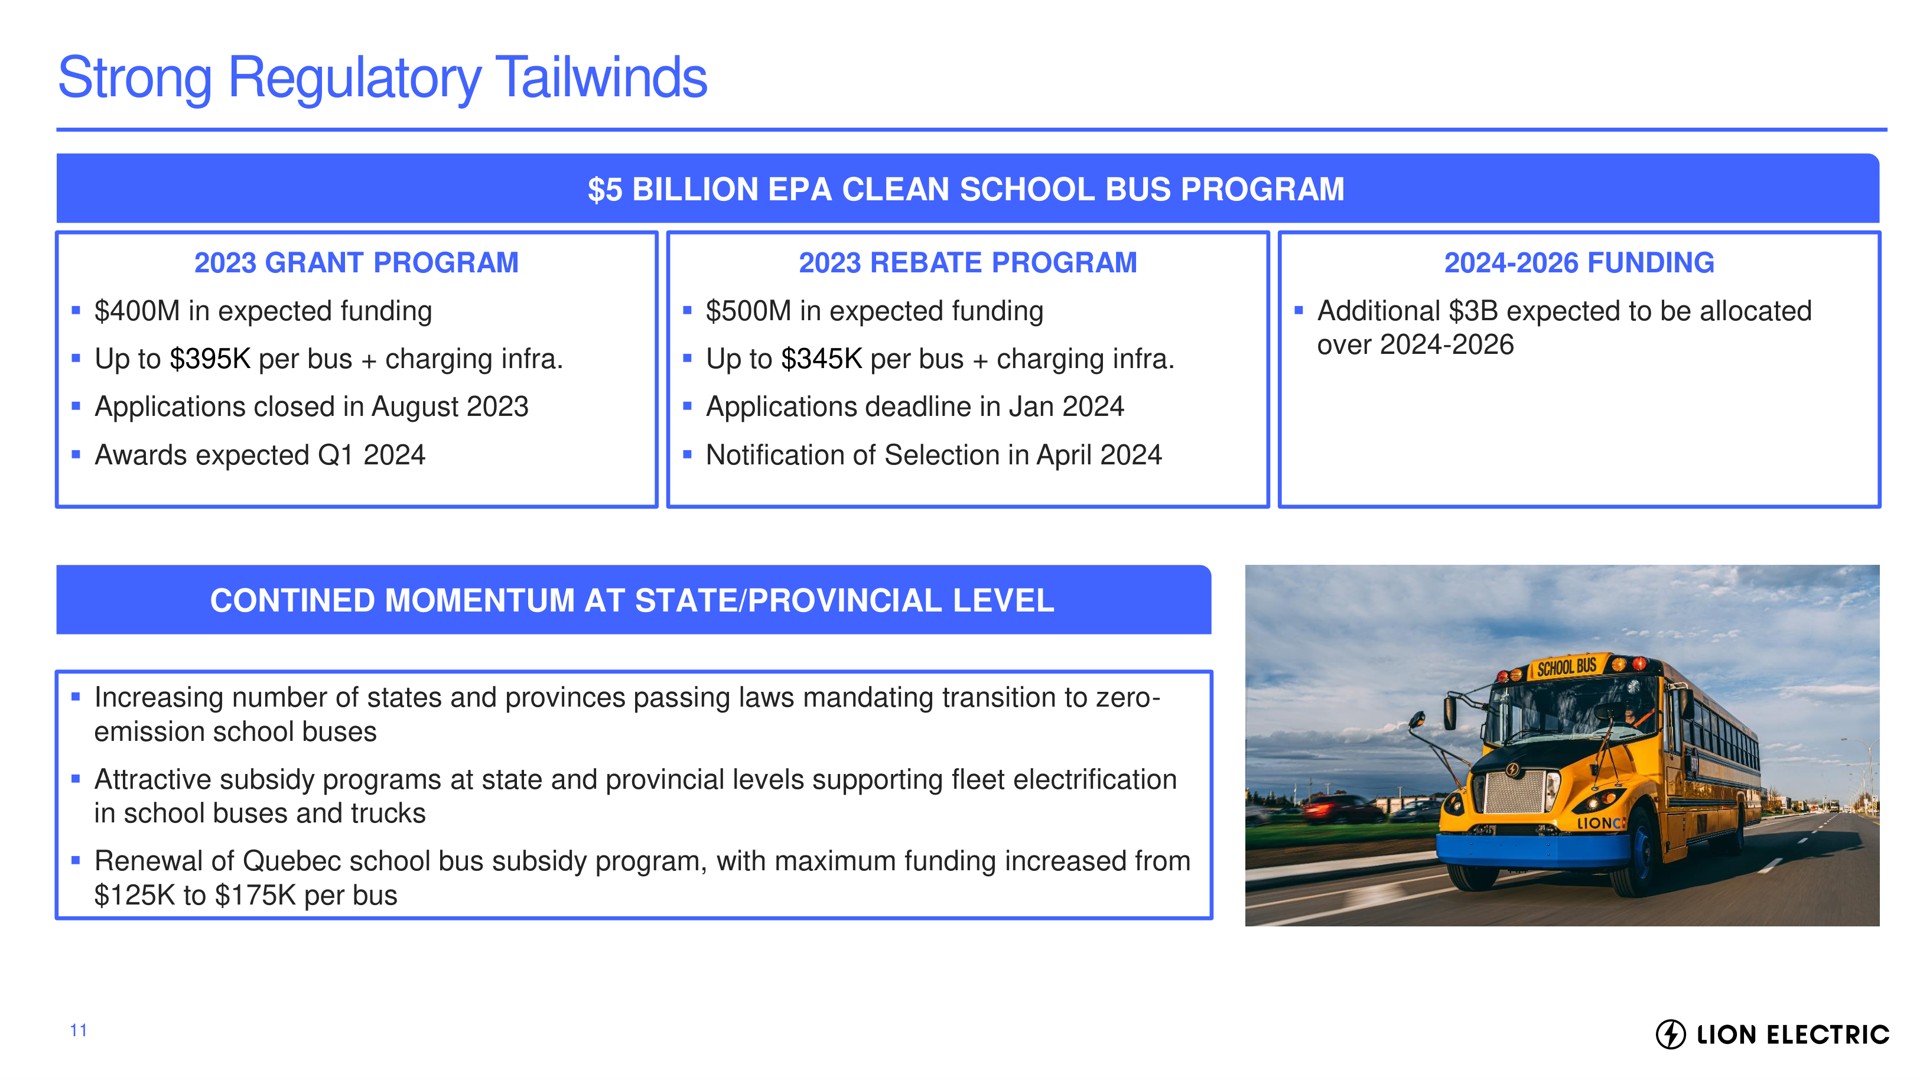 strong regulatory billion clean school bus program grant program rebate program funding in expected funding in expected funding additional expected to be allocated up to per bus charging infra up to per bus charging infra over applications closed in august applications deadline in awards expected notification of selection in emission school buses increasing number of states and provinces passing laws mandating transition to zero to per bus renewal of school bus subsidy program with maximum funding increased from attractive subsidy programs at state and provincial levels supporting fleet electrification in school buses and trucks lion electric | Lion Electric